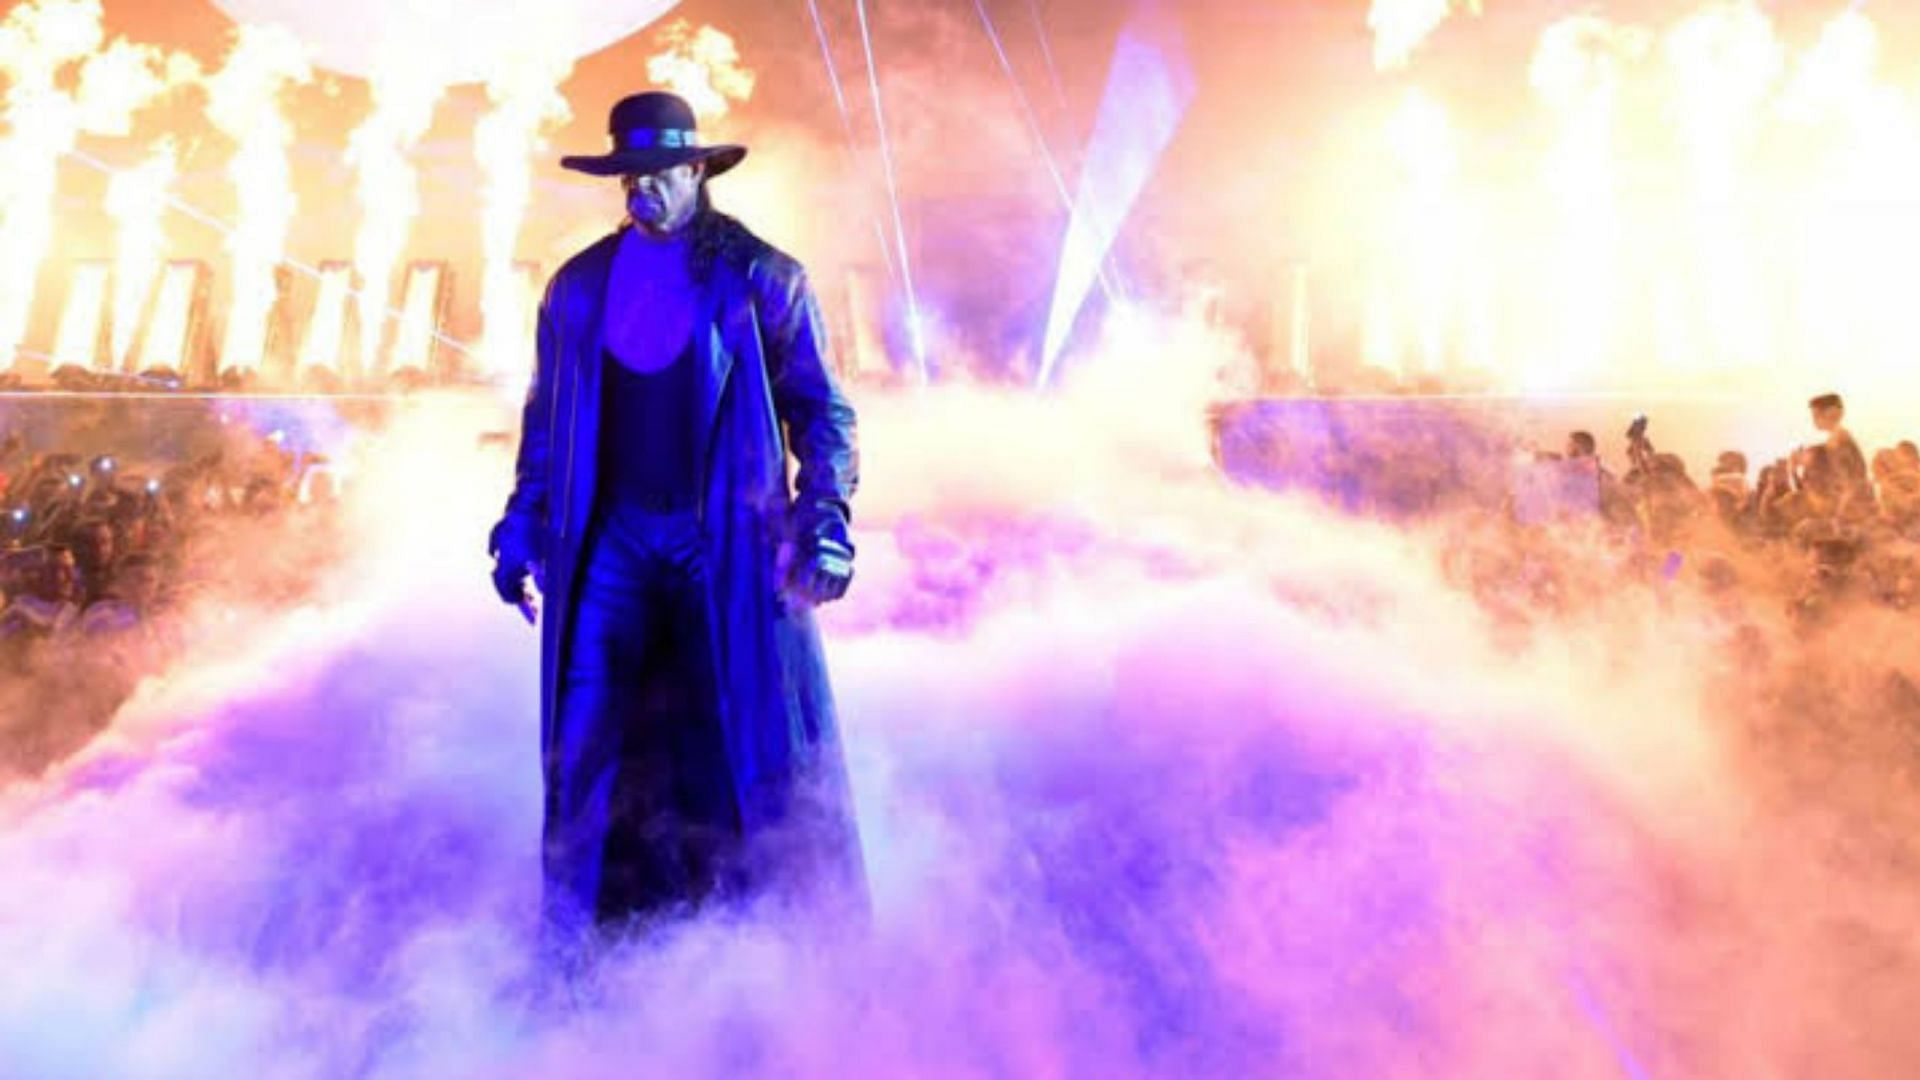 The Undertaker suffered a pyro fail while making his entrance.